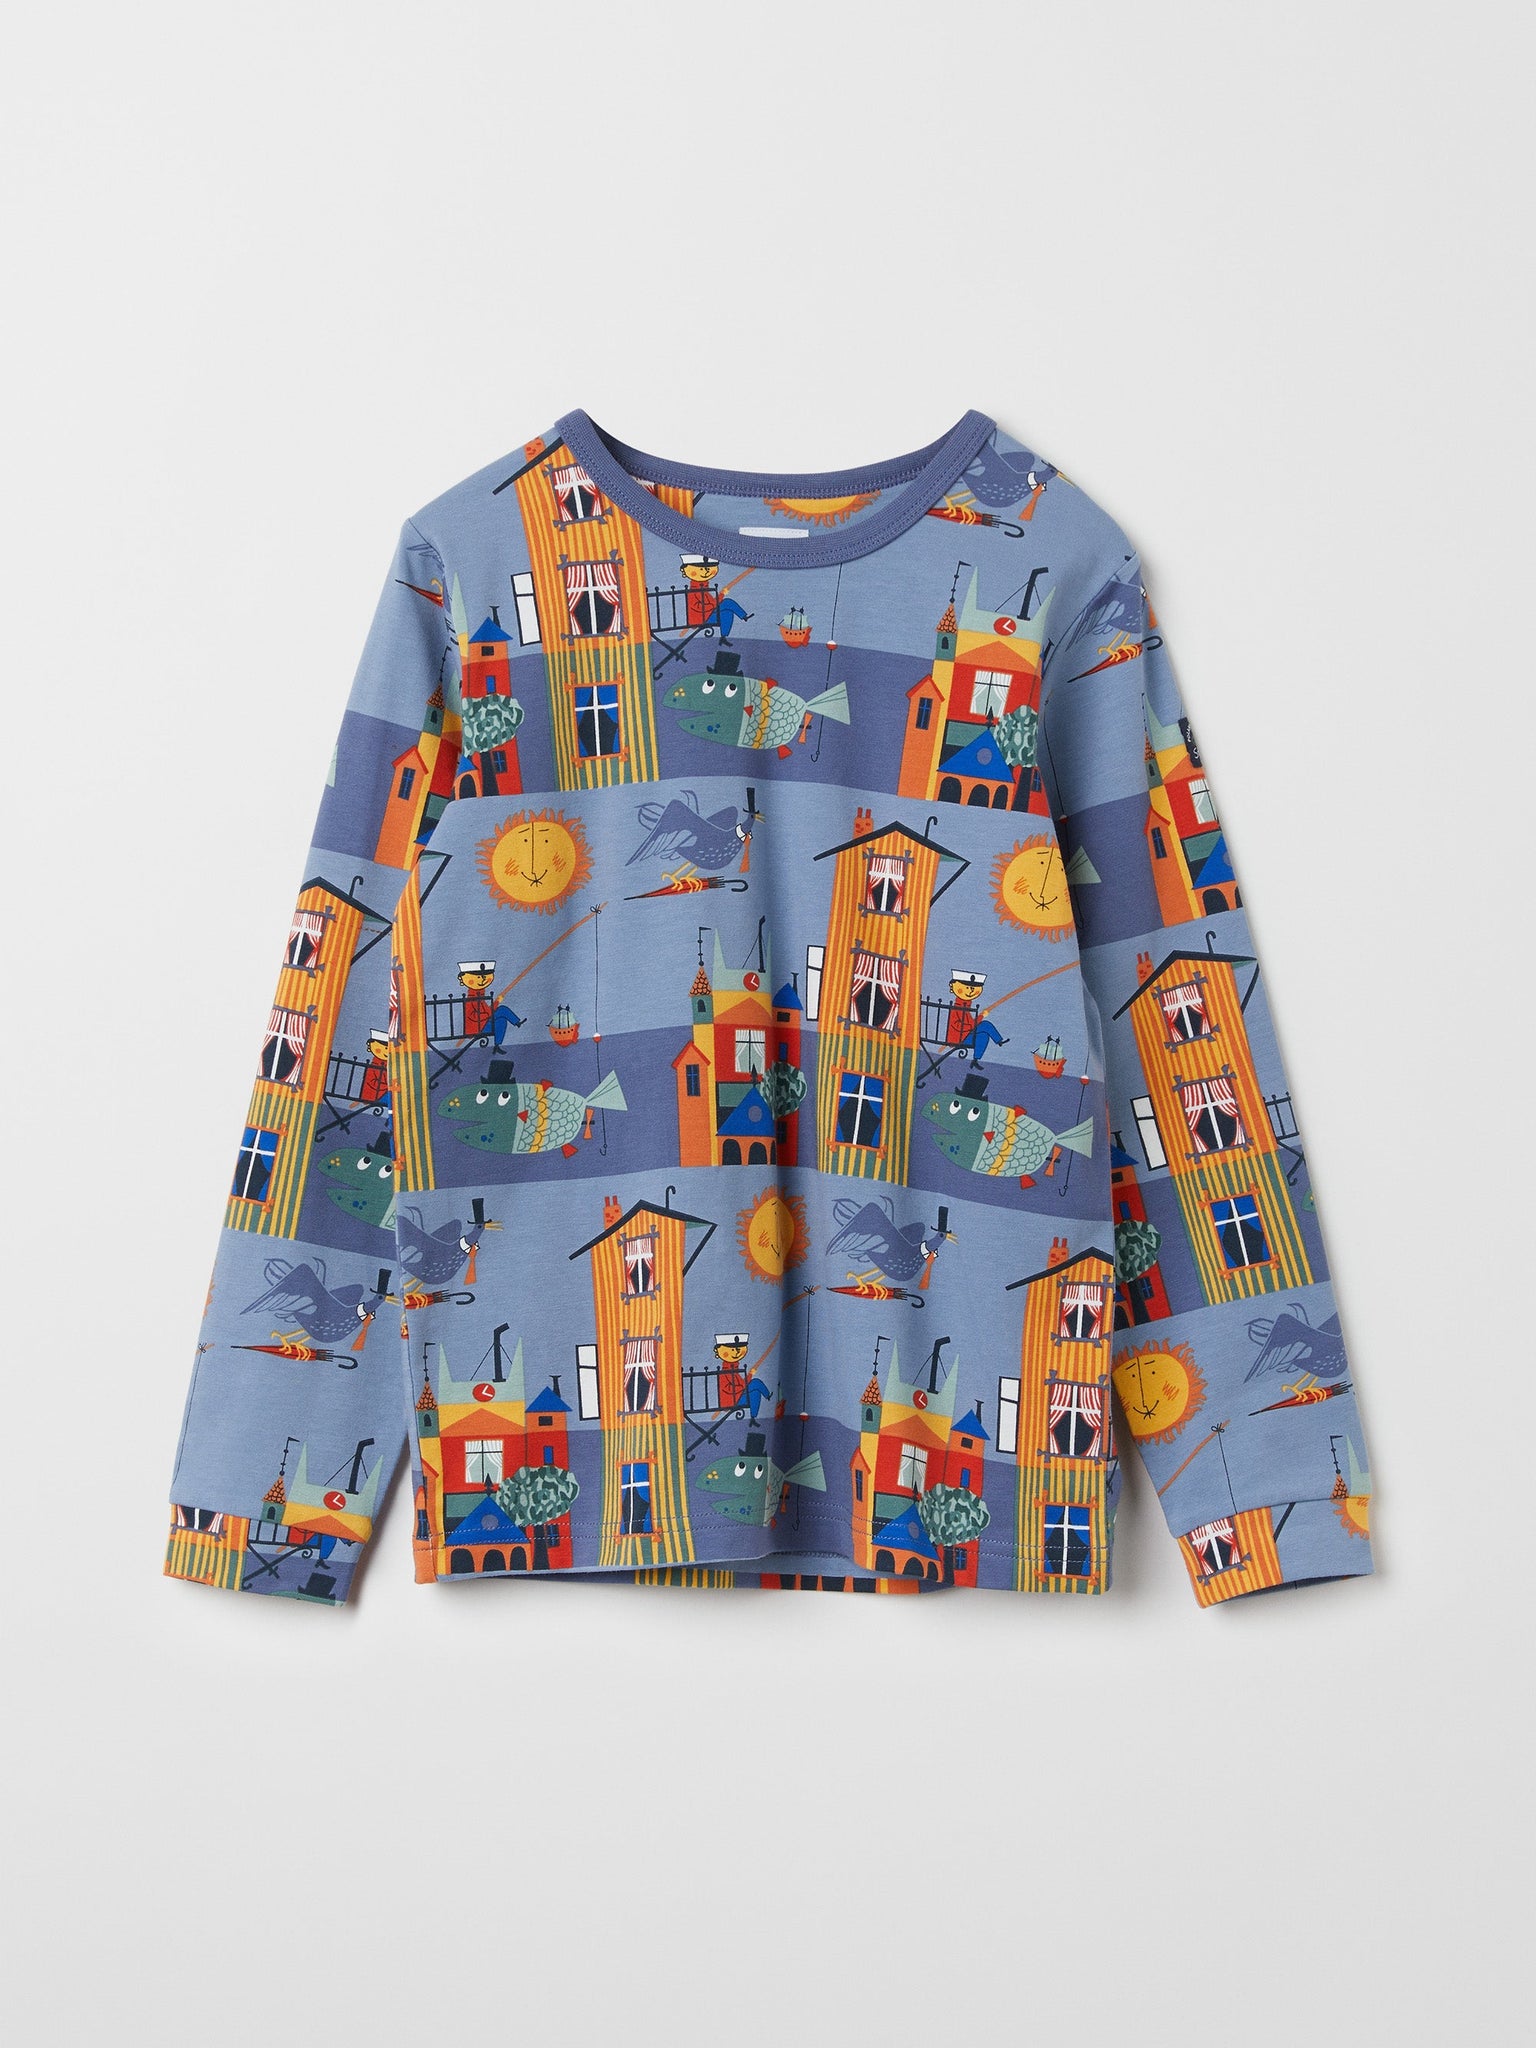 Organic Cotton Blue Scandi Kids Top from the Polarn O. Pyret kidswear collection. Nordic kids clothes made from sustainable sources.